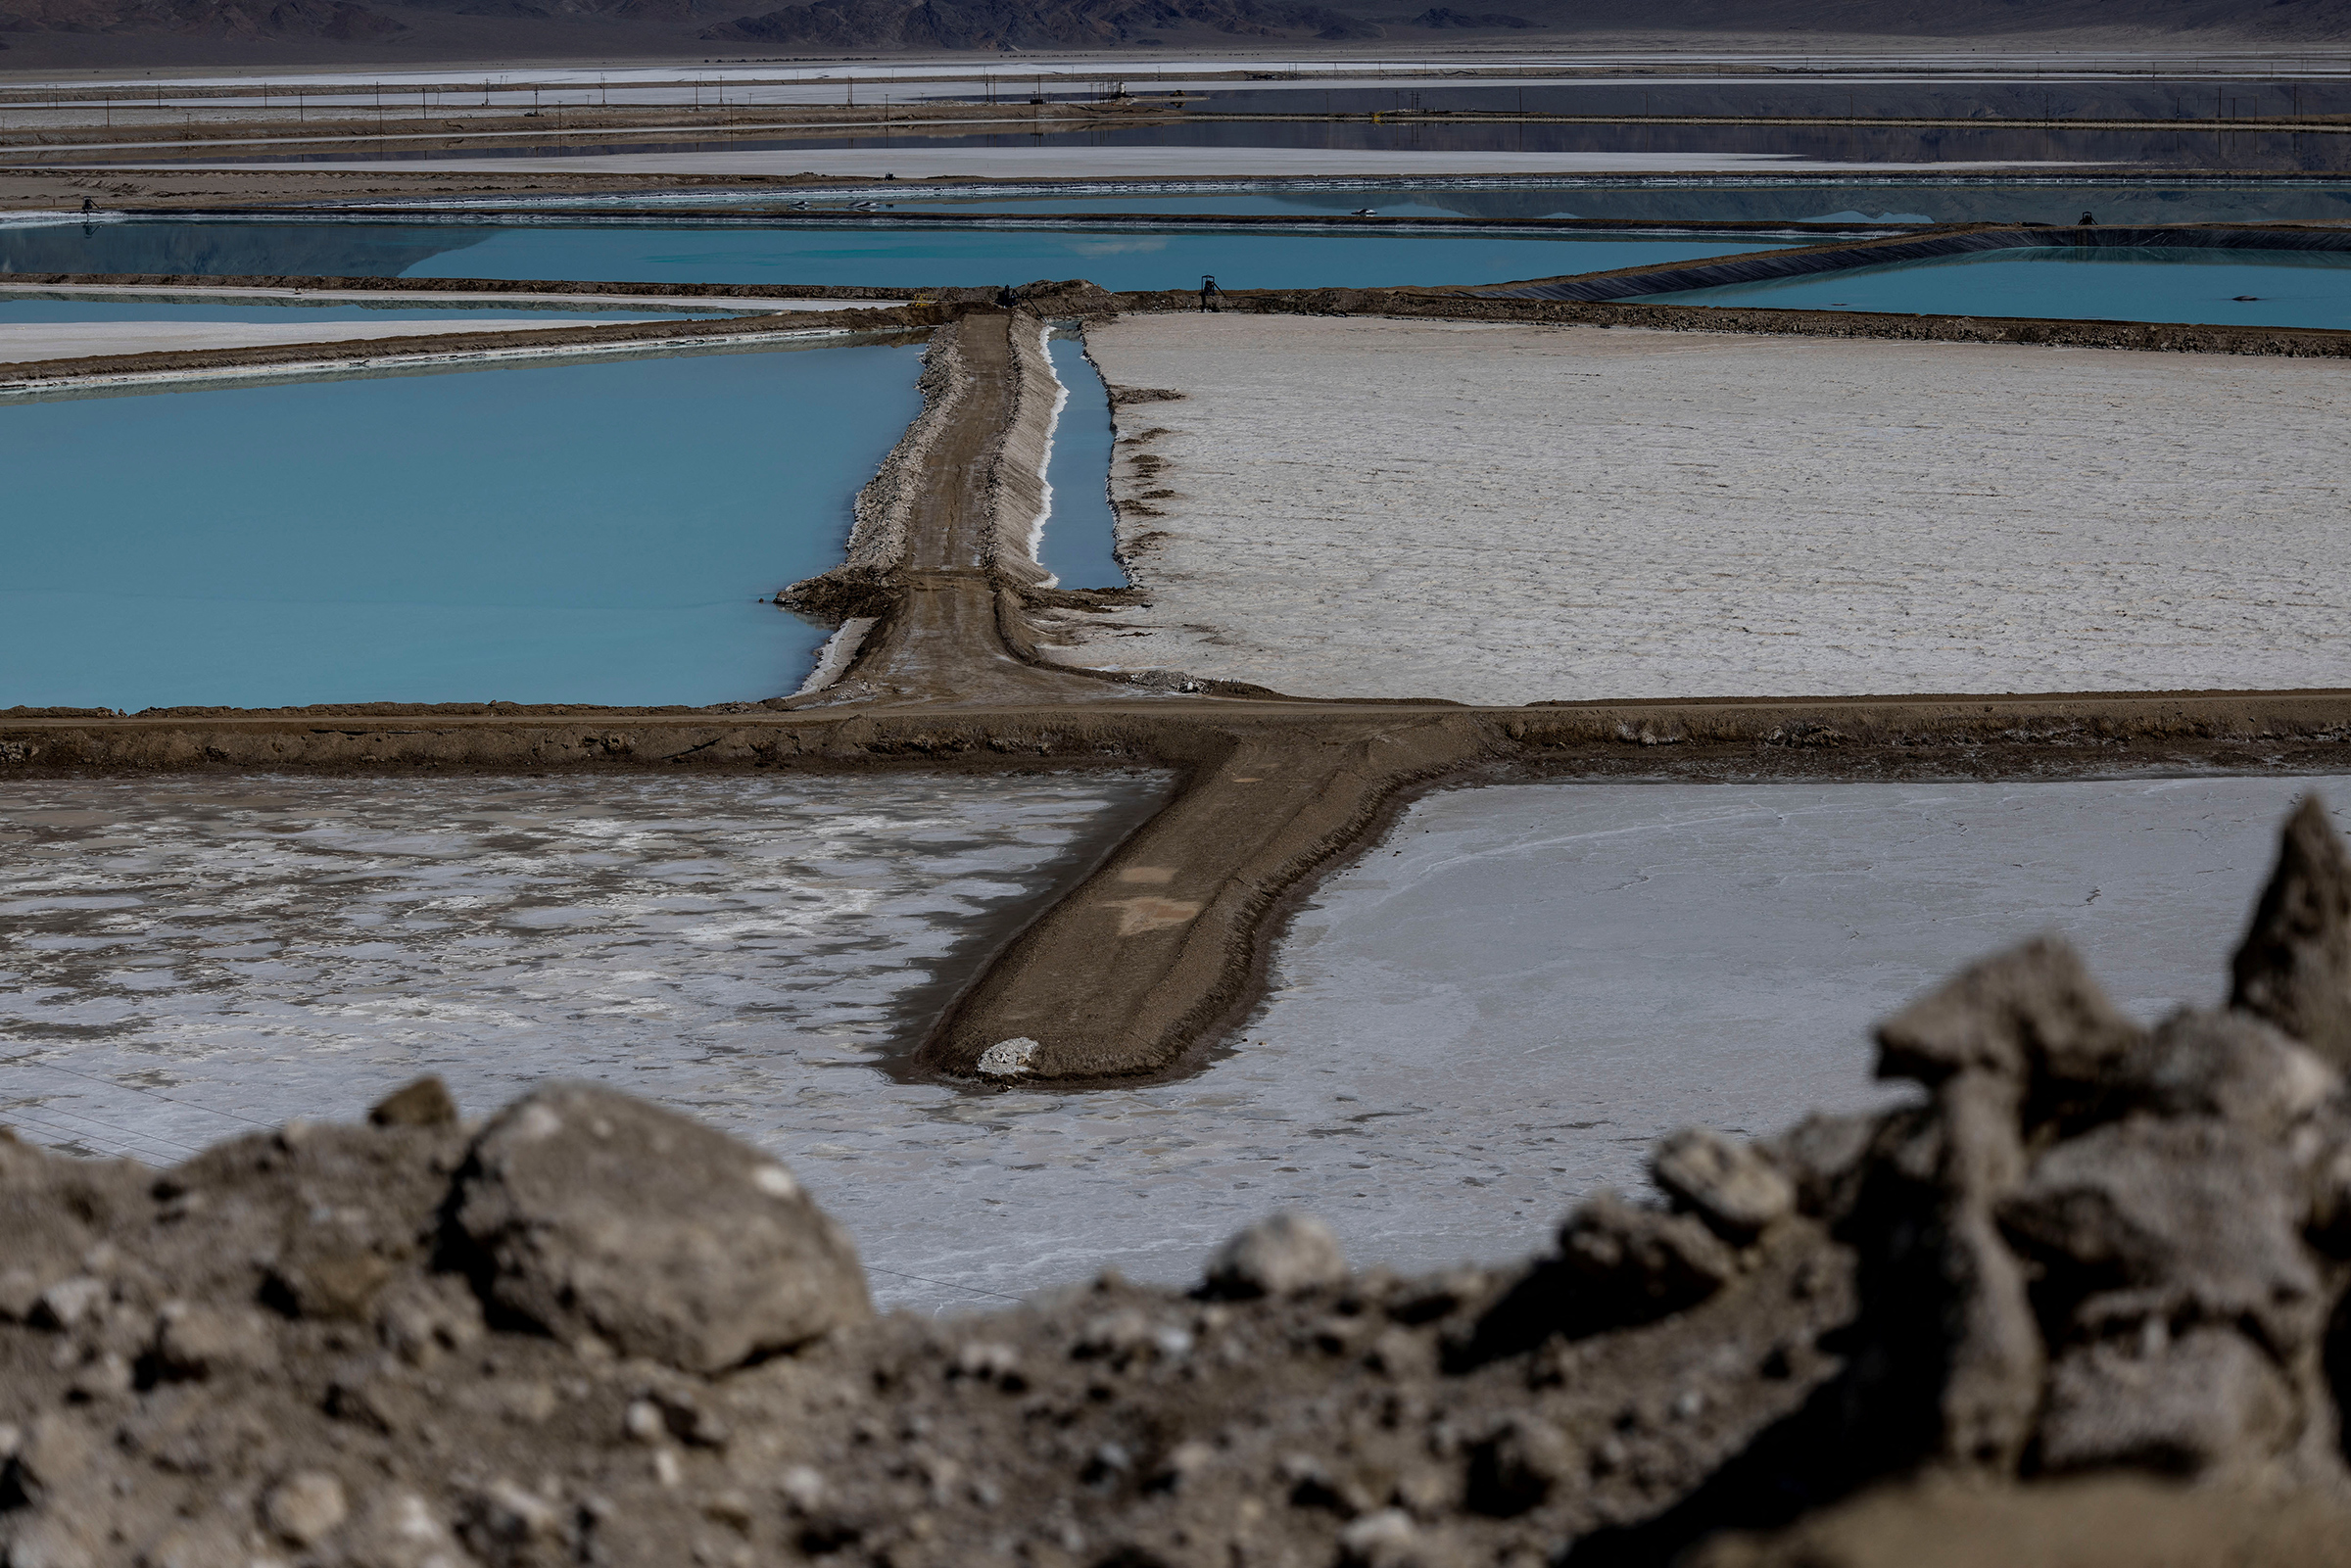 Lithium evaporation ponds are seen at Albemarle Lithium production facility in Silver Peak, Nev., on Oct. 6, 2022. (Carlos Barria—Reuters)